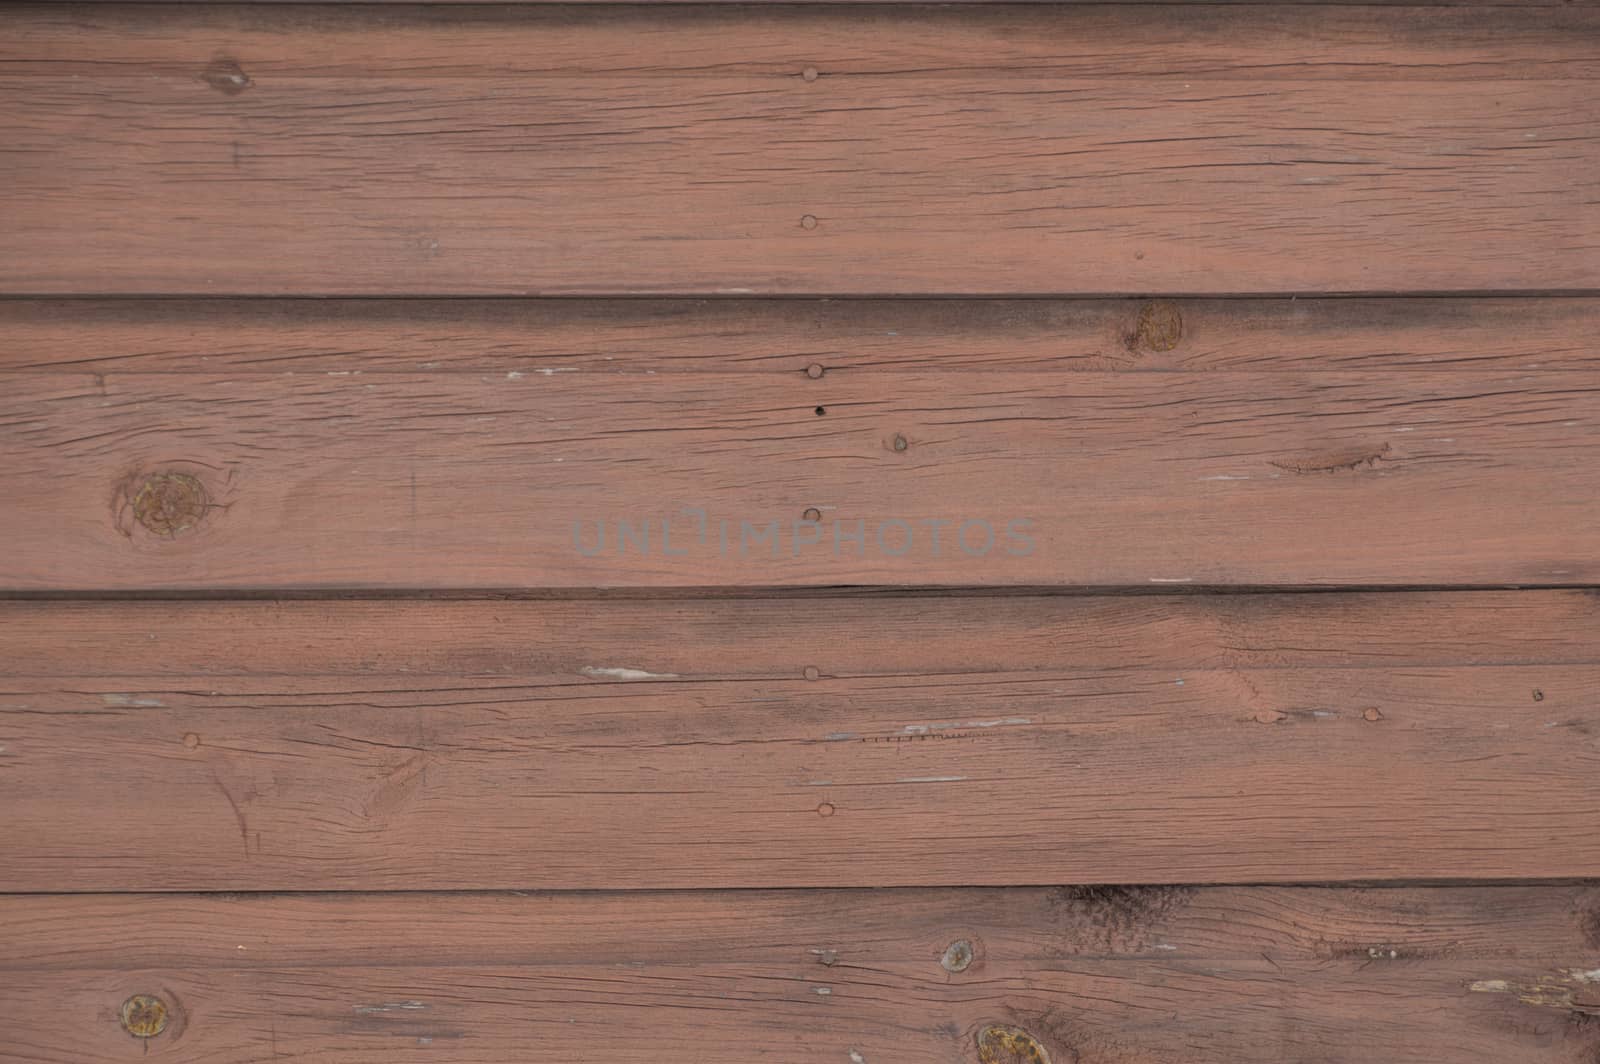 Horizontal running grungy brown stained painted planks and boards from a waterfront cottage.